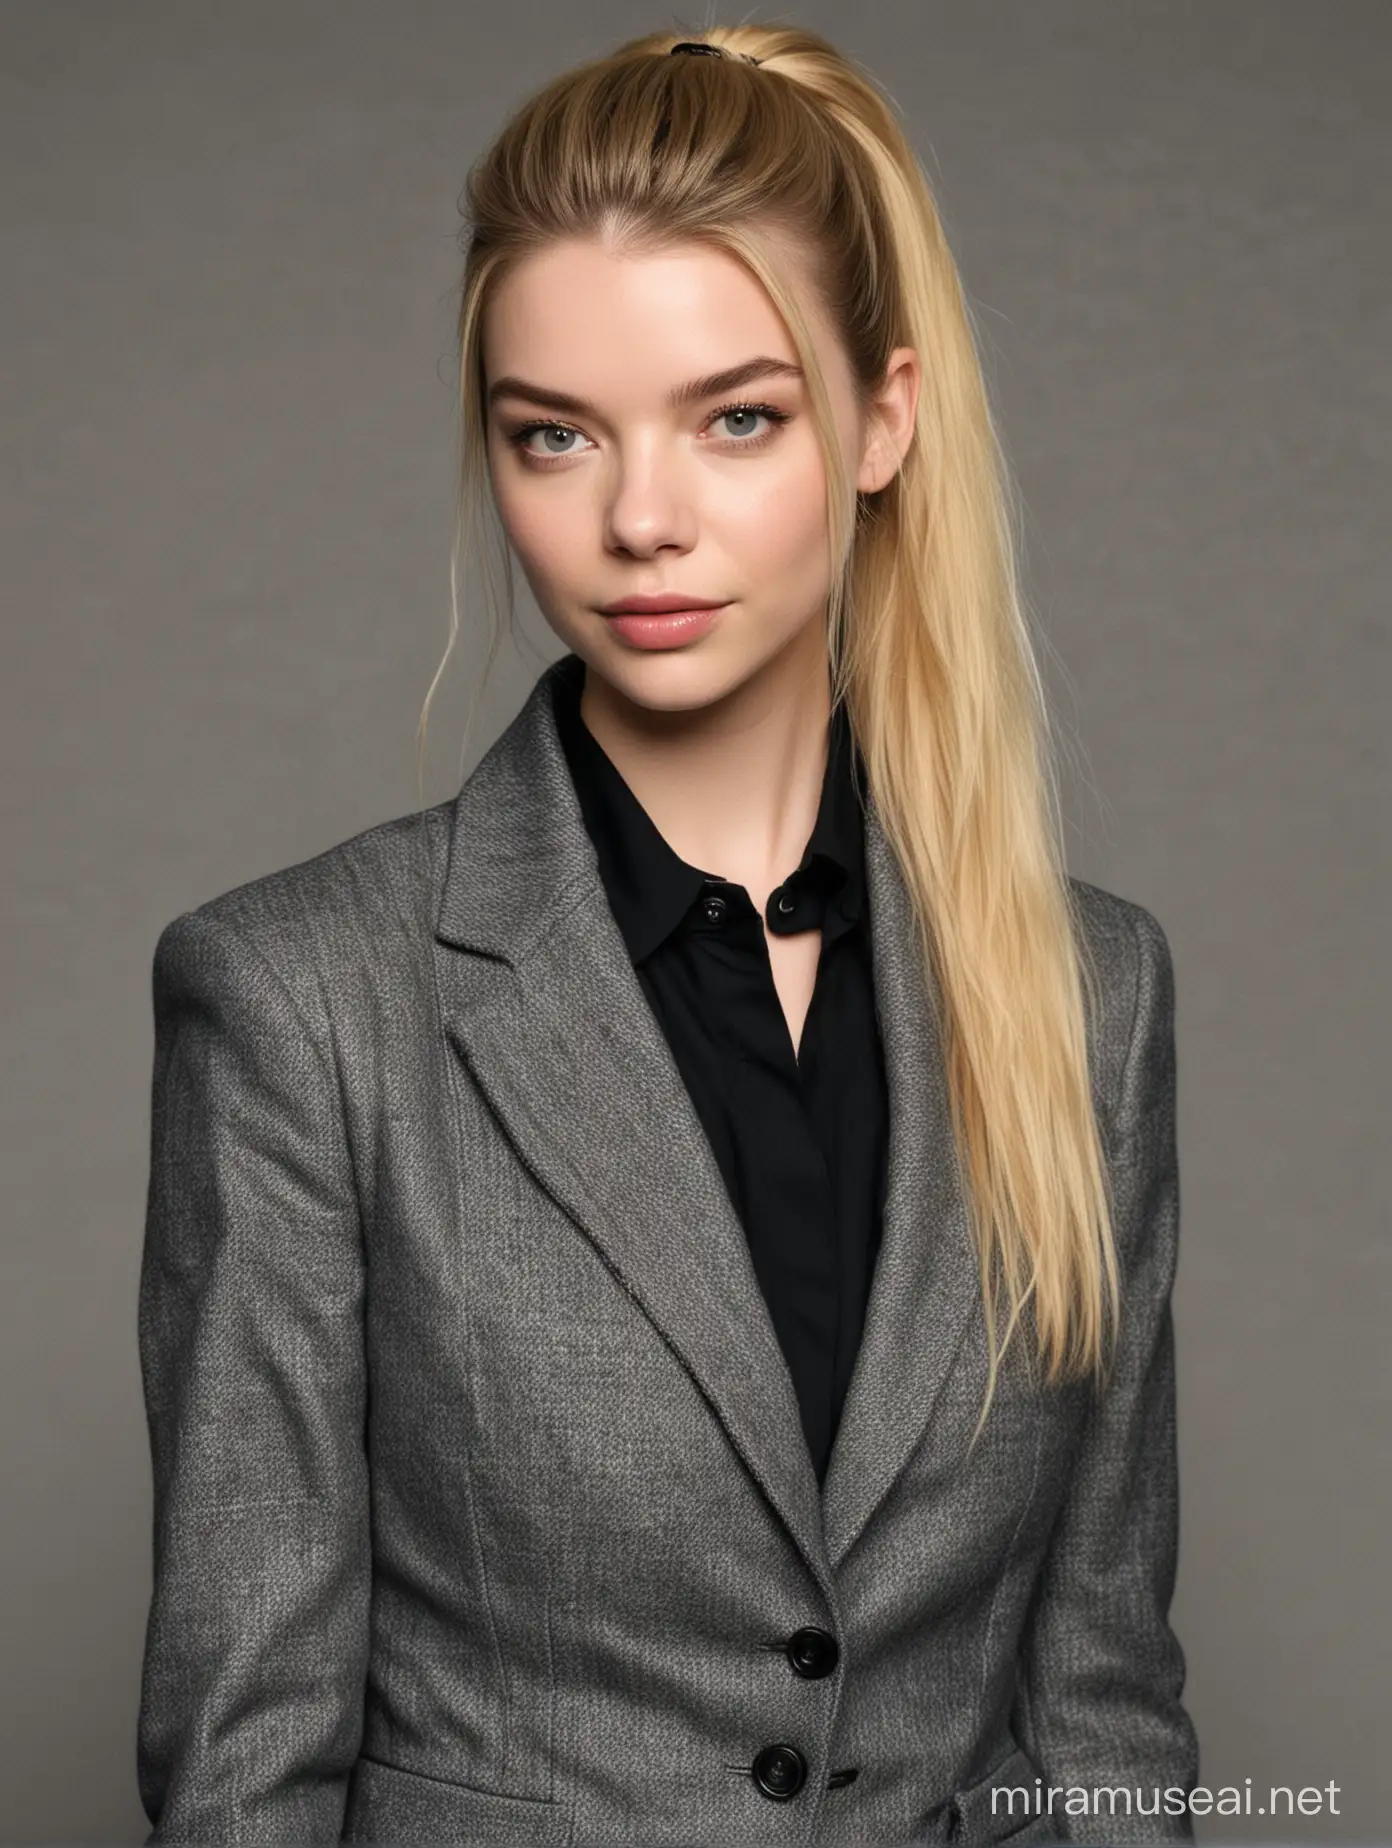 Anya Taylor Joy,long blonde hair tied in a pony tail,black blouse under a gray tweed blazer